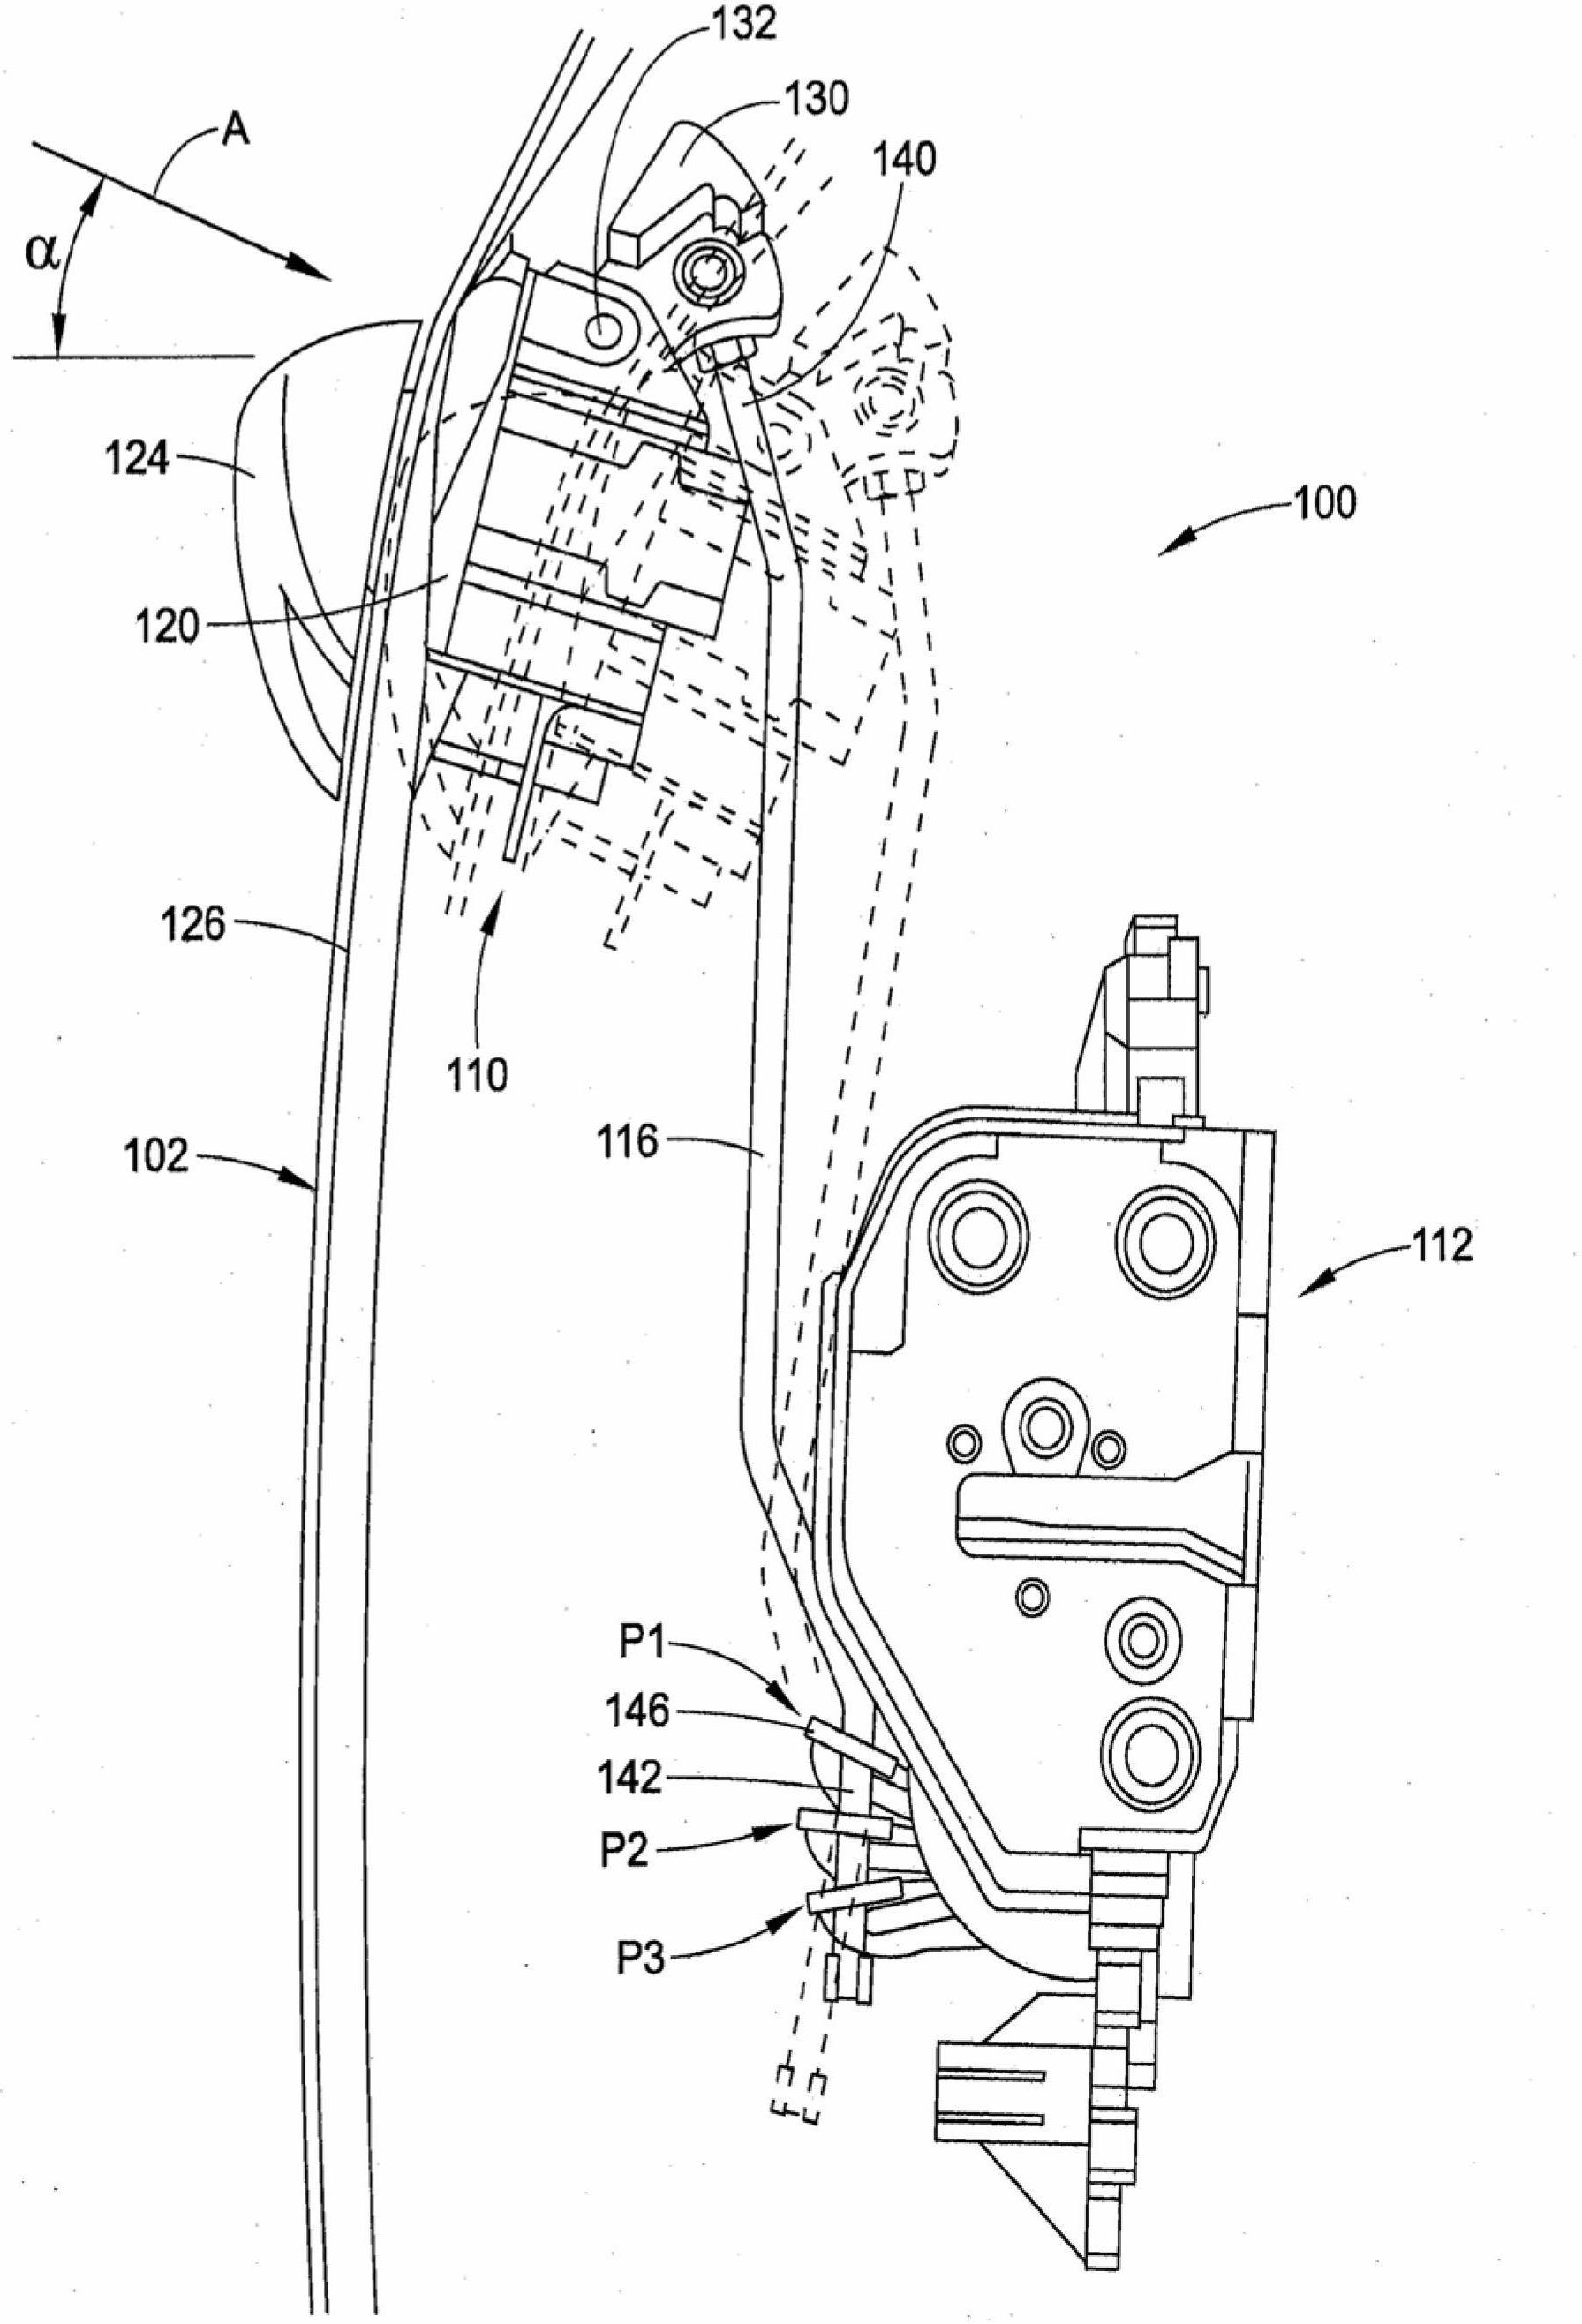 Device for prevention of door opening during roll-over